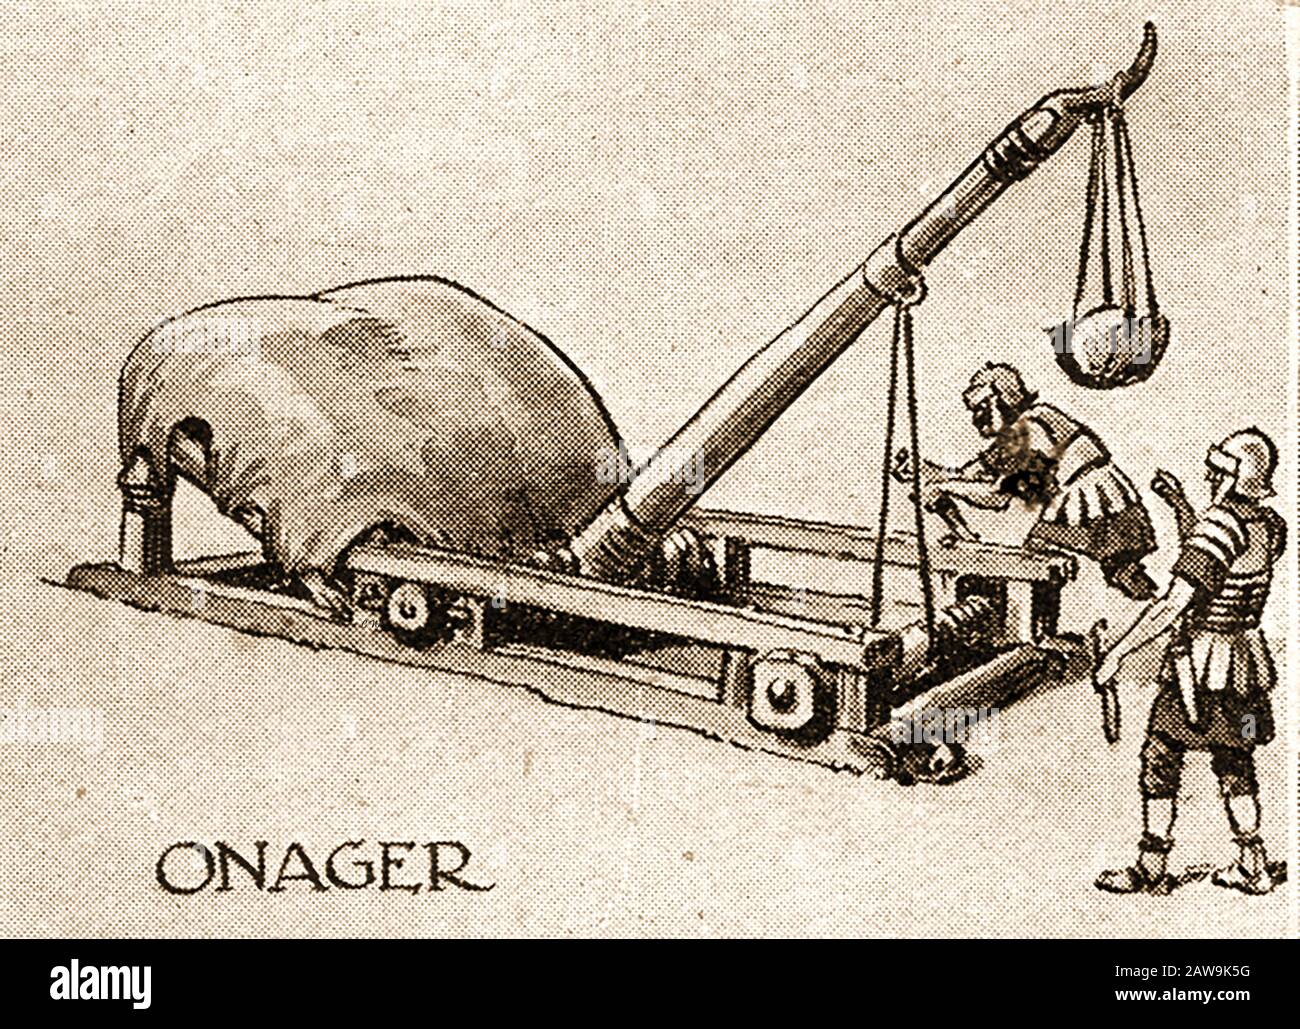 A 1940's illustration showing historic battle weapons - The Onager (Catapult). It was an imperial-era Roman torsion powered siege engine first mentioned in 353 AD by Ammianus Marcellinus. Also called a Scorpion. It takes its name (onager = mule) from the way the engine   kicks as it catapults the stones or other missiles. Stock Photo